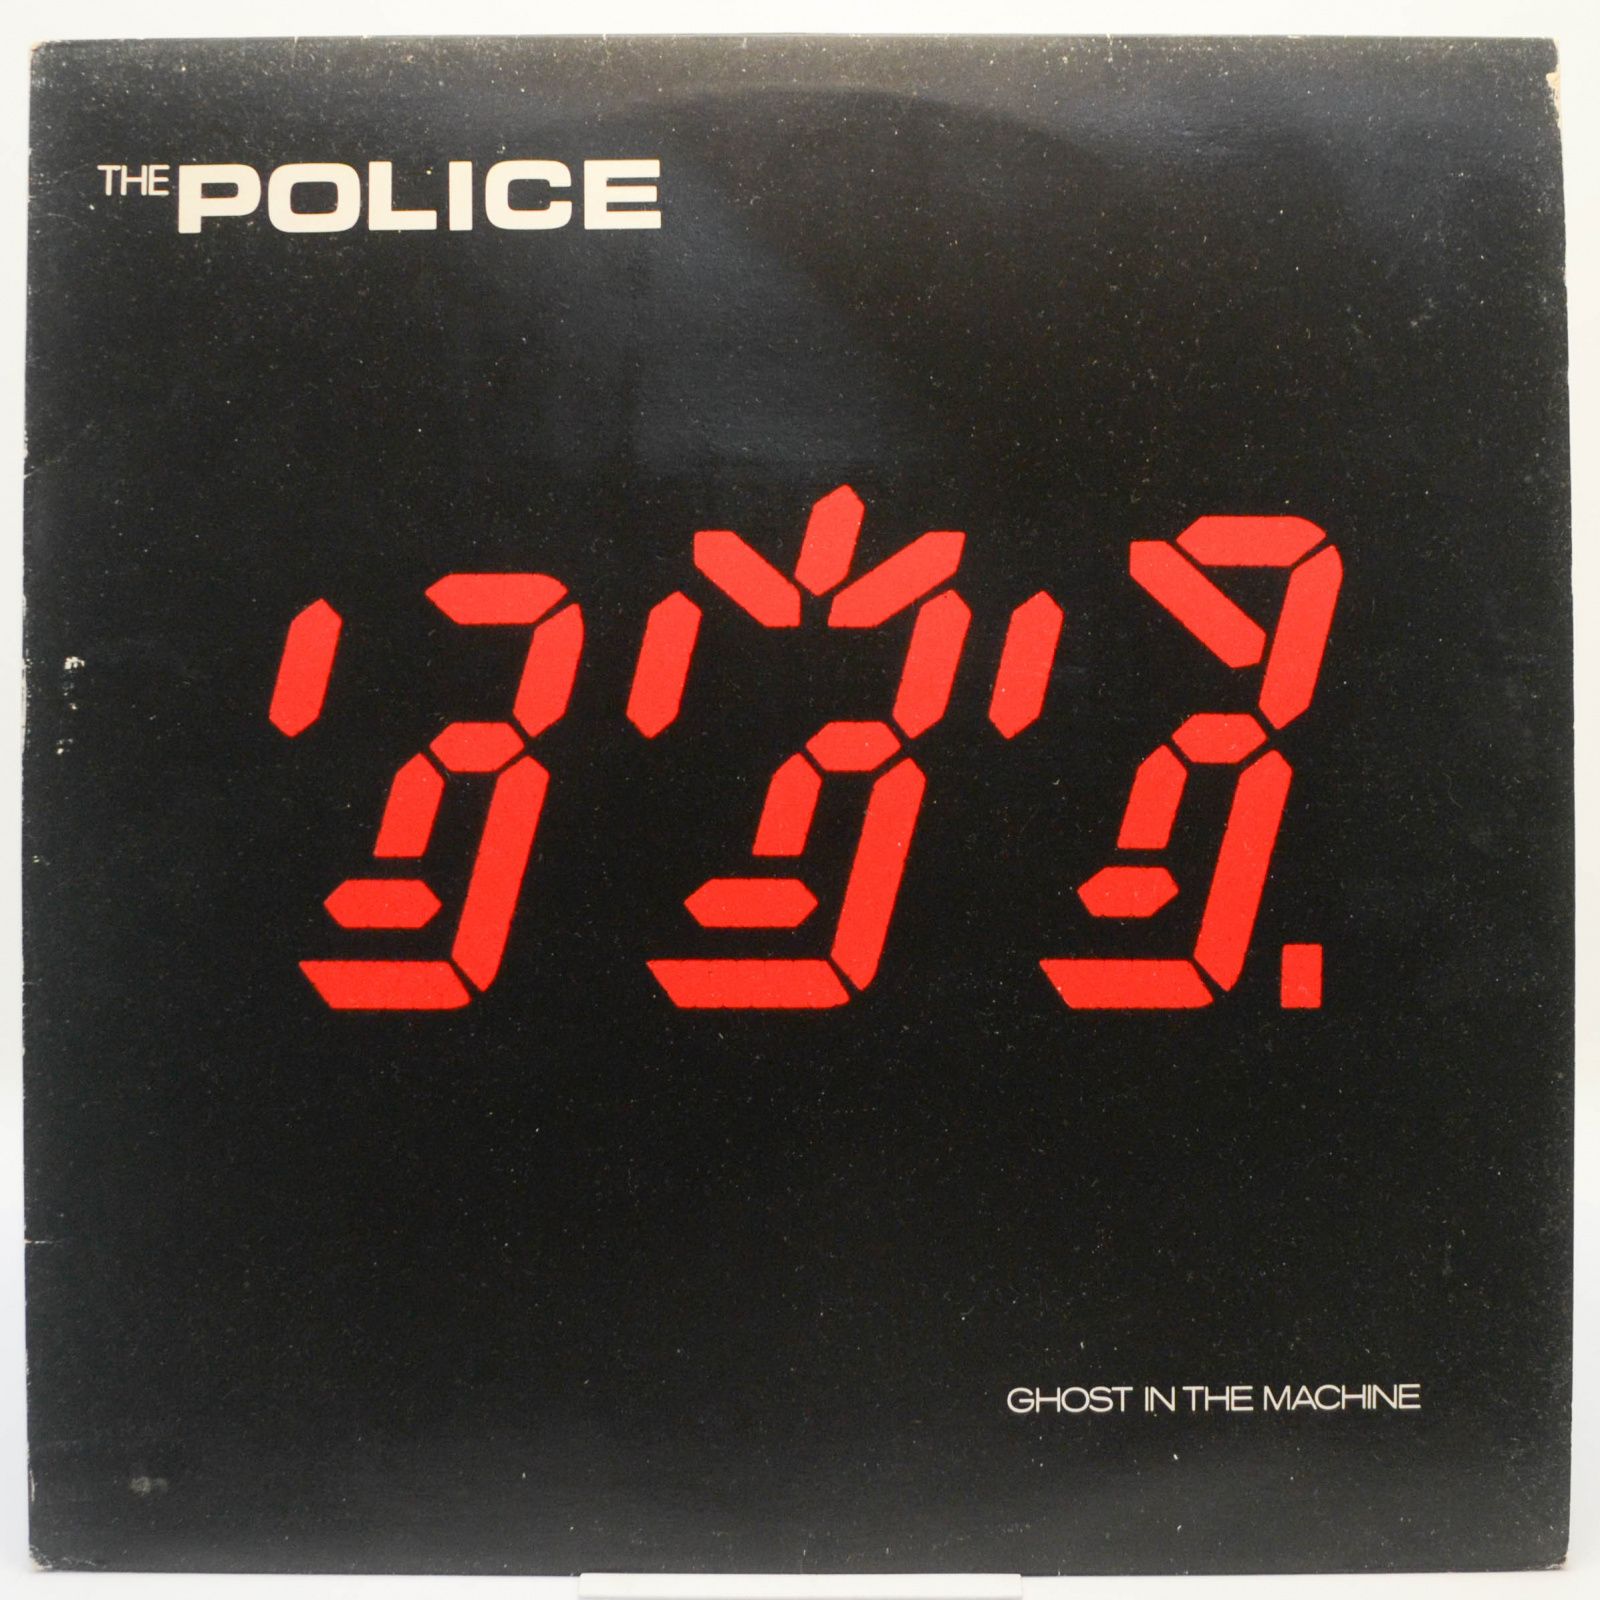 Police — Ghost In The Machine, 1981